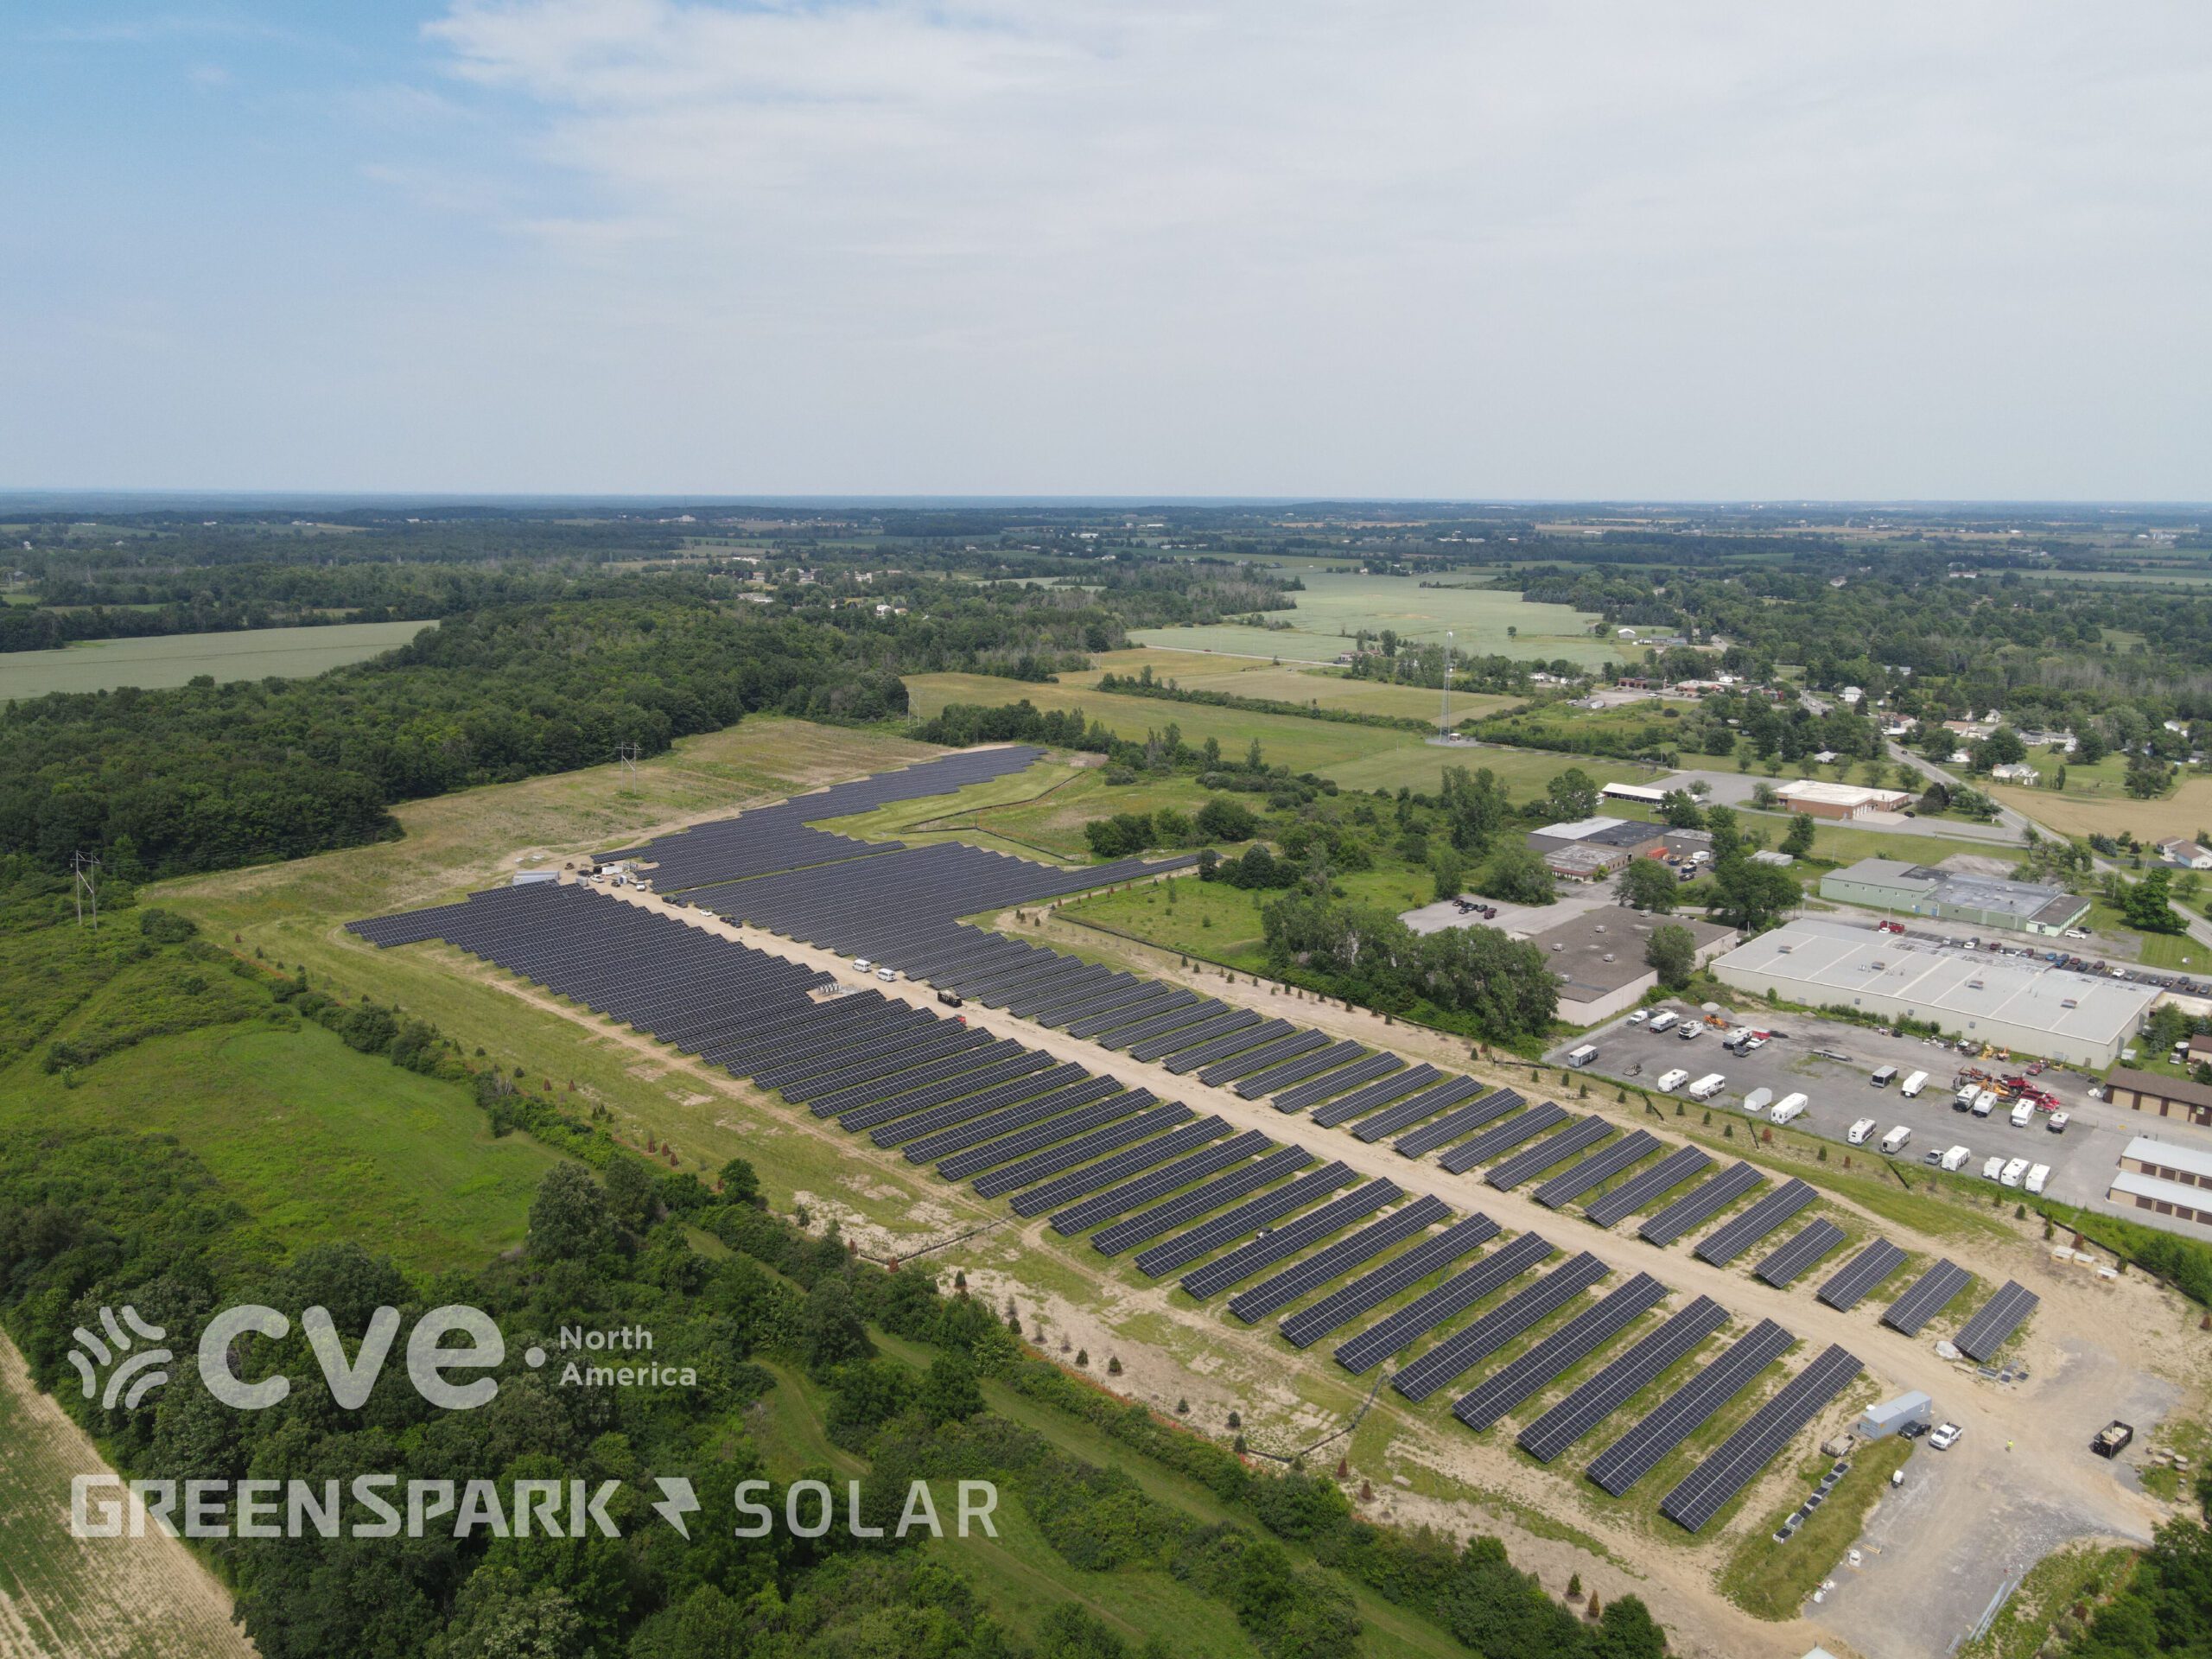 B Corporations CVE North America and GreenSpark Solar Announce Operational Launch of Wheatfield Community Solar Project in New York